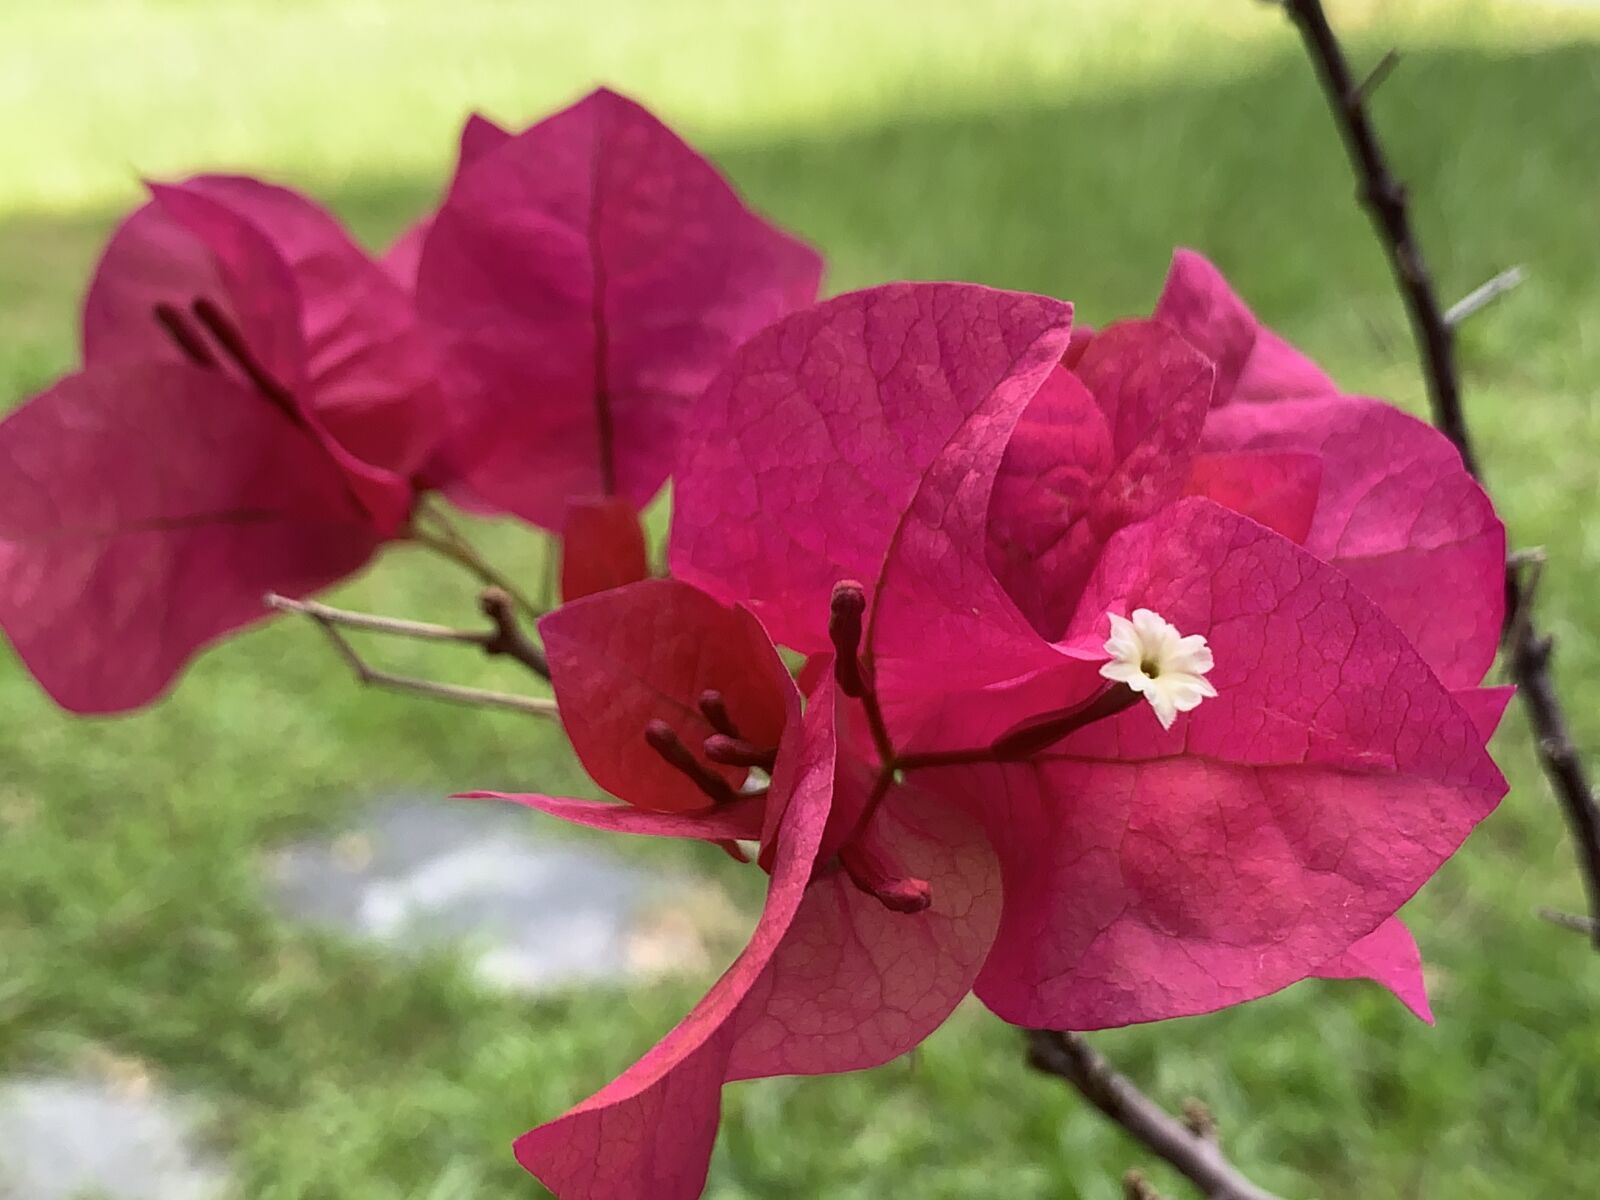 iPhone XS Max back dual camera 4.25mm f/1.8 sample photo. Bougainvillea, flower, plant photography